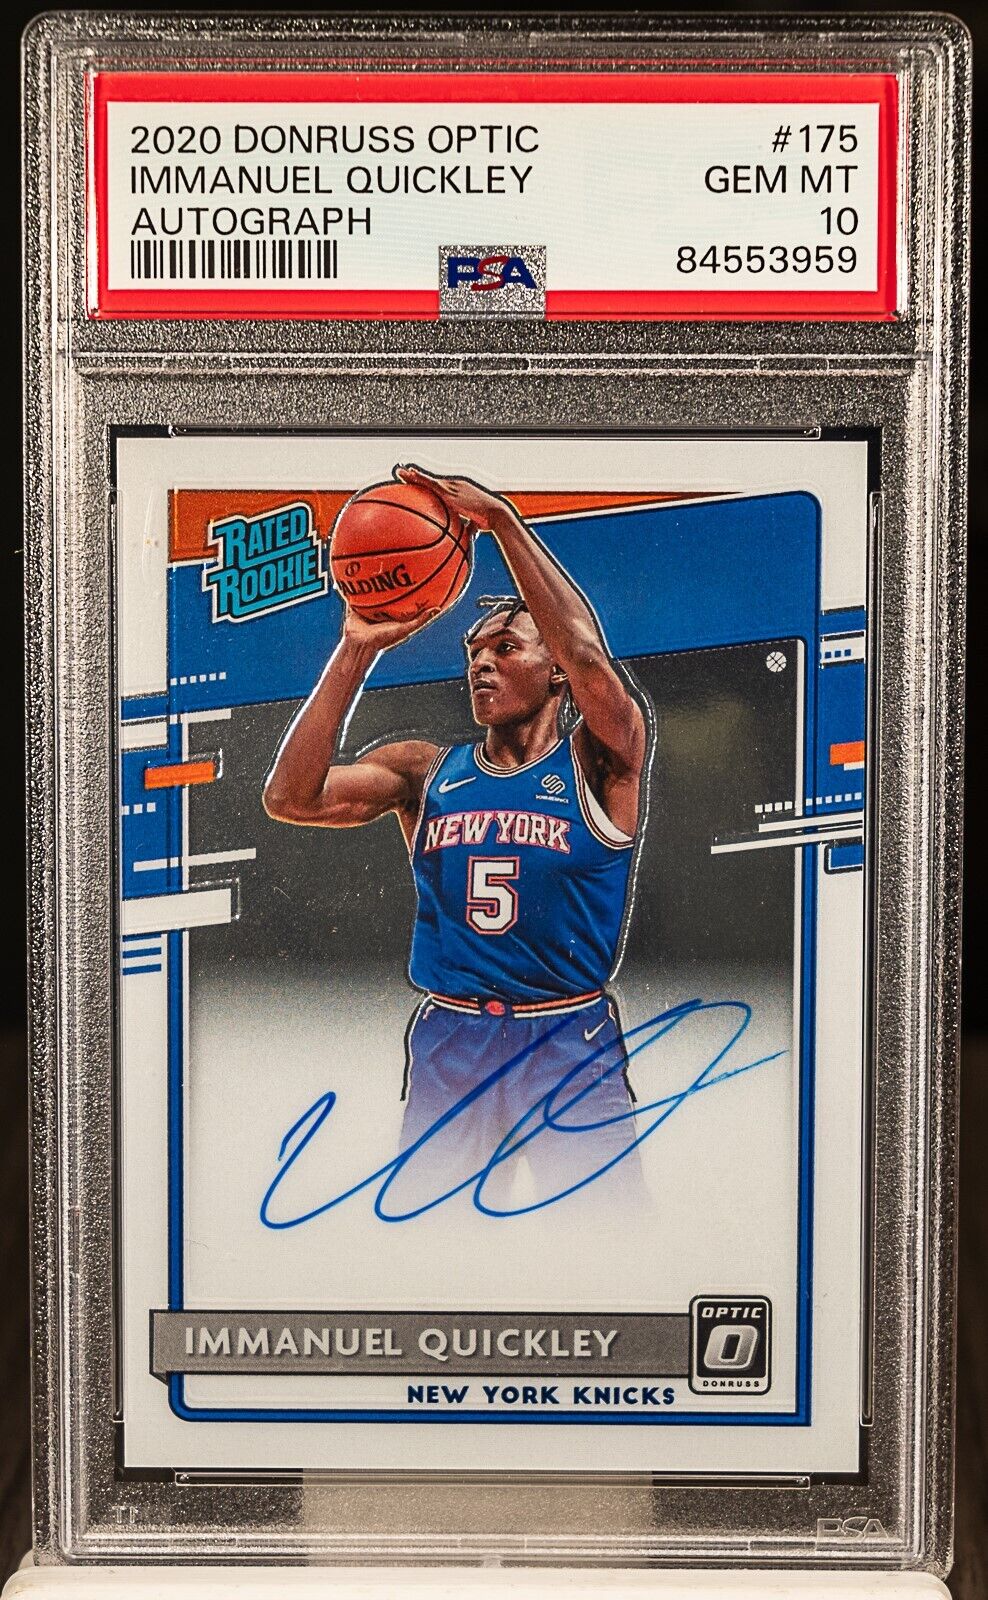 84553959 IMMANUEL QUICKLEY 2020 Donruss Optic 175 Rated RC Rookie Auto PSA 10